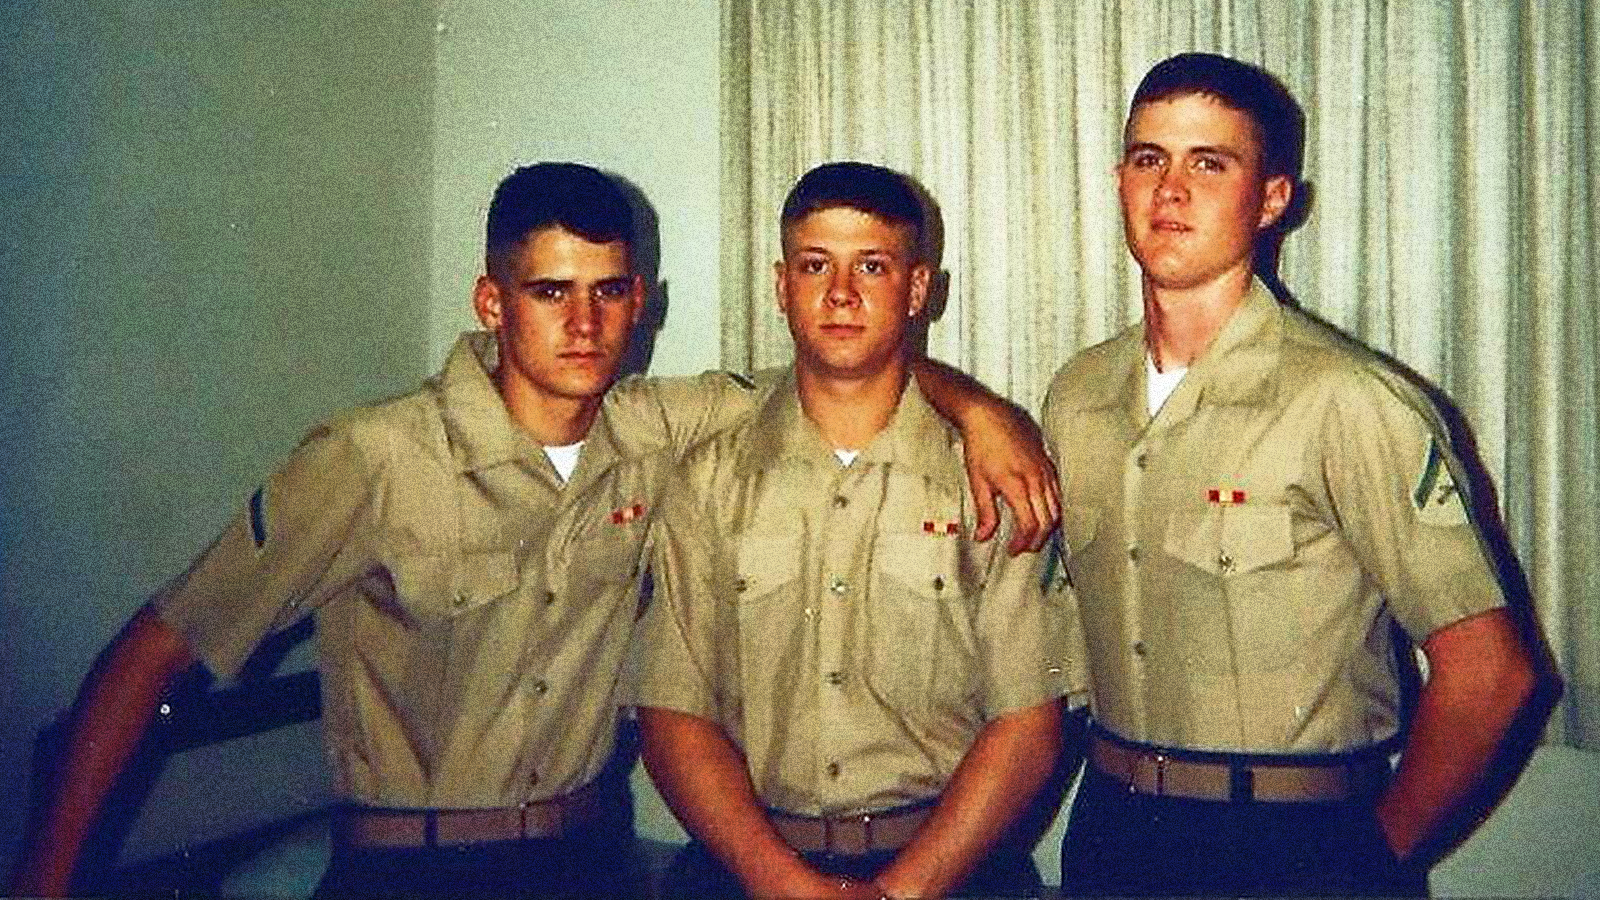 David Swisher stands next to his peers in the Marine Corps.